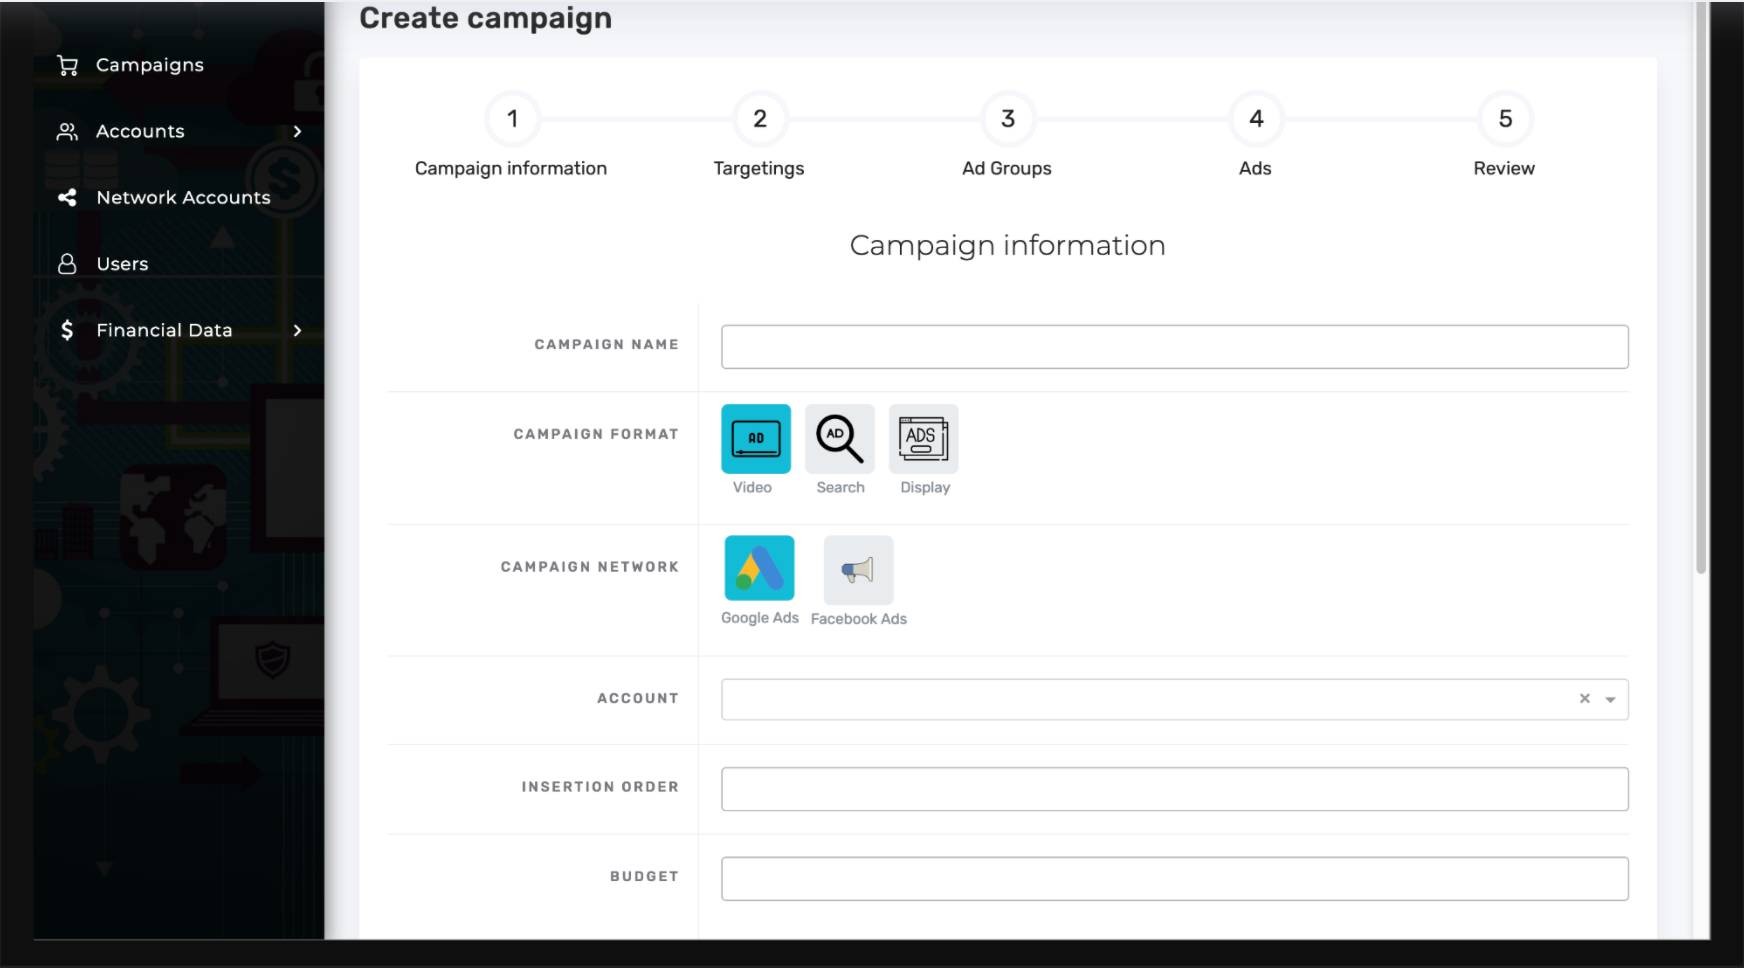 Intuitive campaign creation wizard